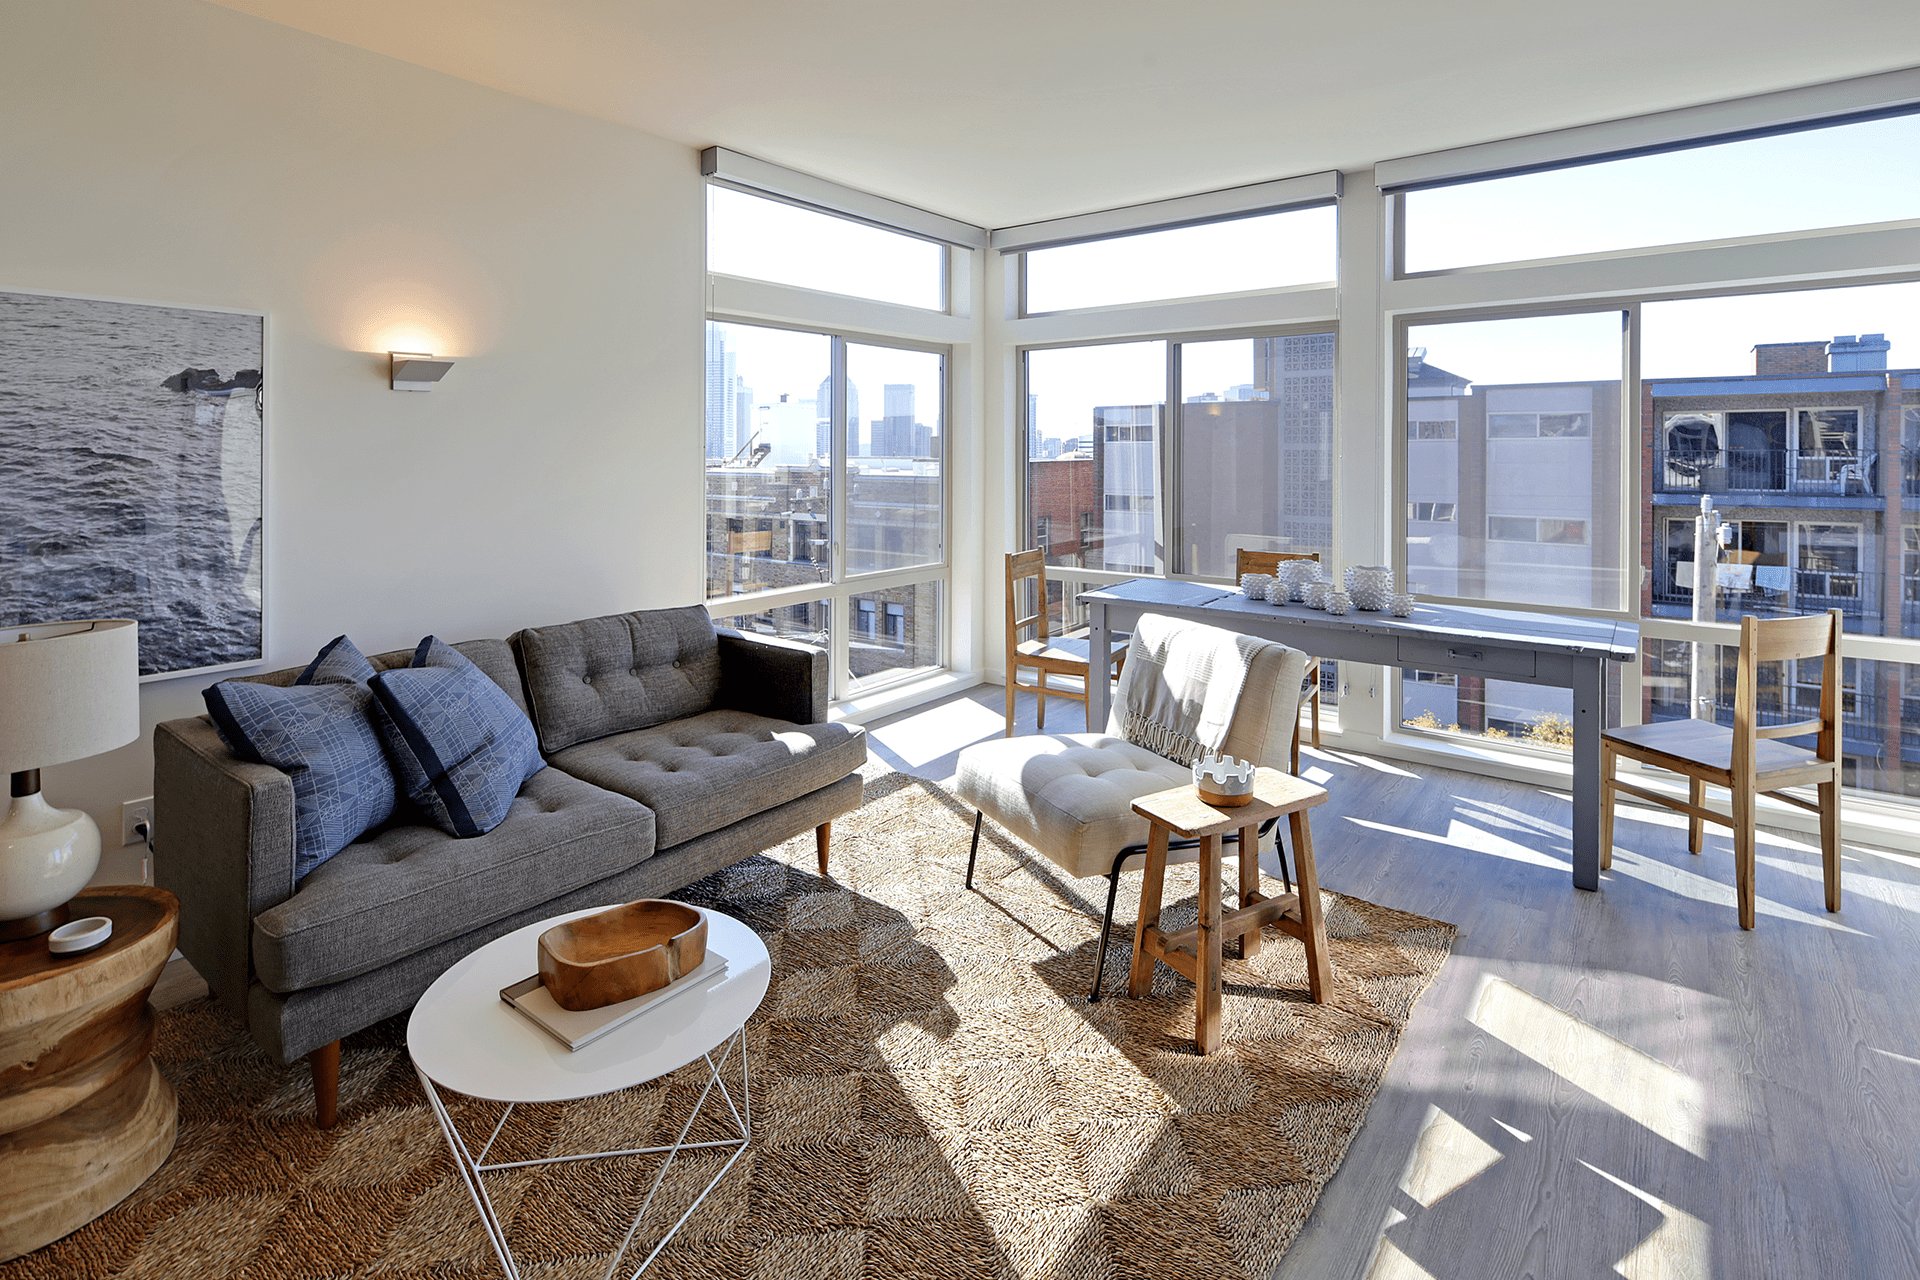 The interior of one of the units in the Lexicon Apartment building includes gray wood floors, a seating area, dining table, and large corner windows.